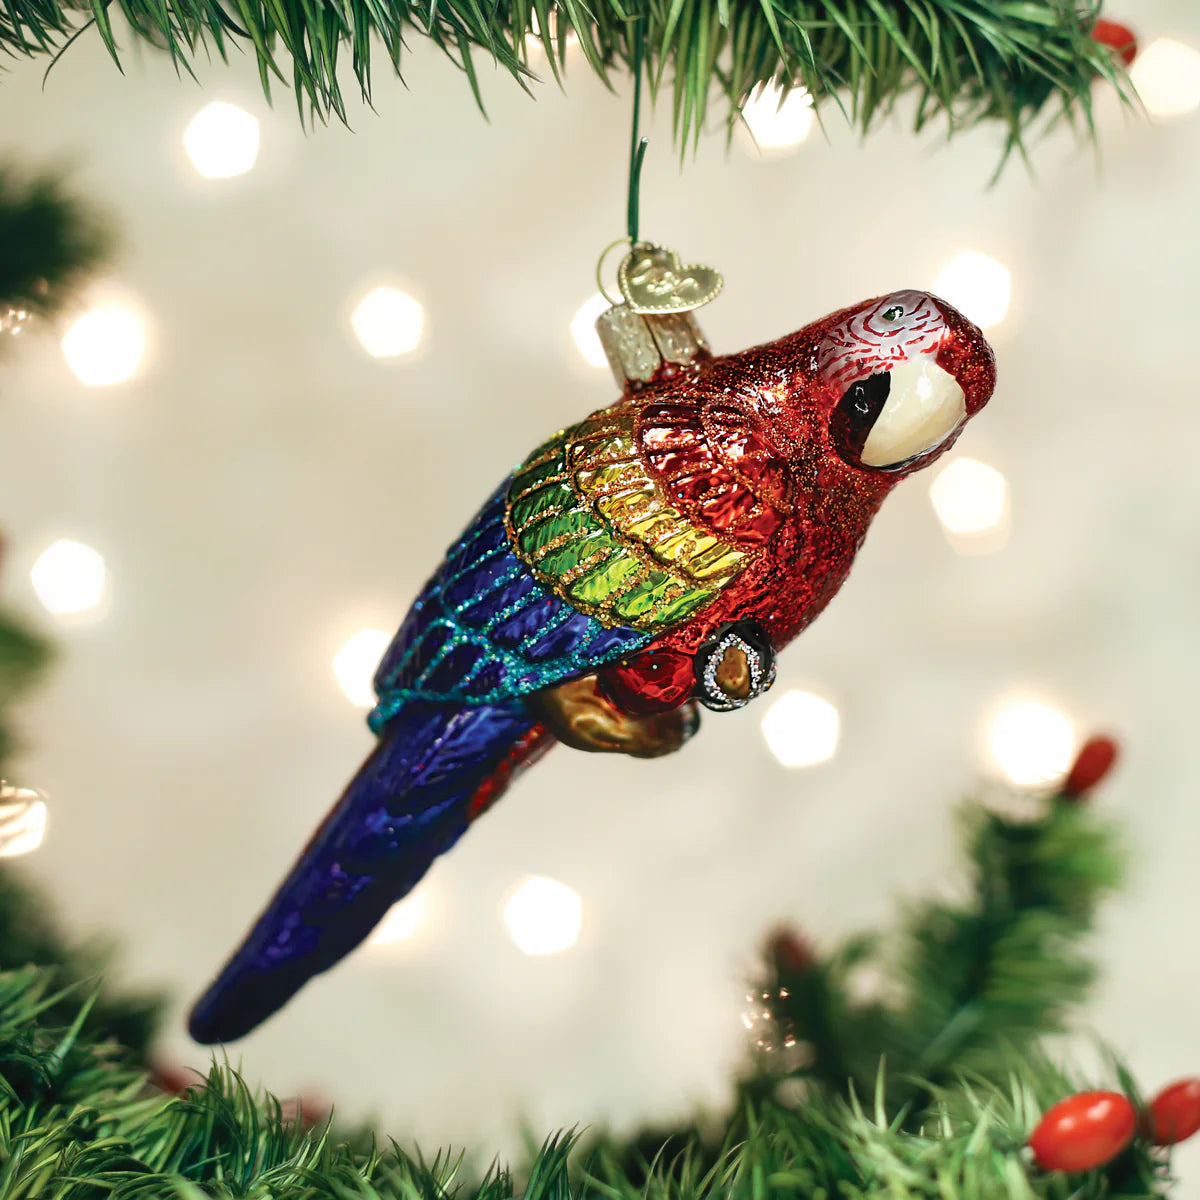 Old World Christmas - Tropical Parrot Ornament